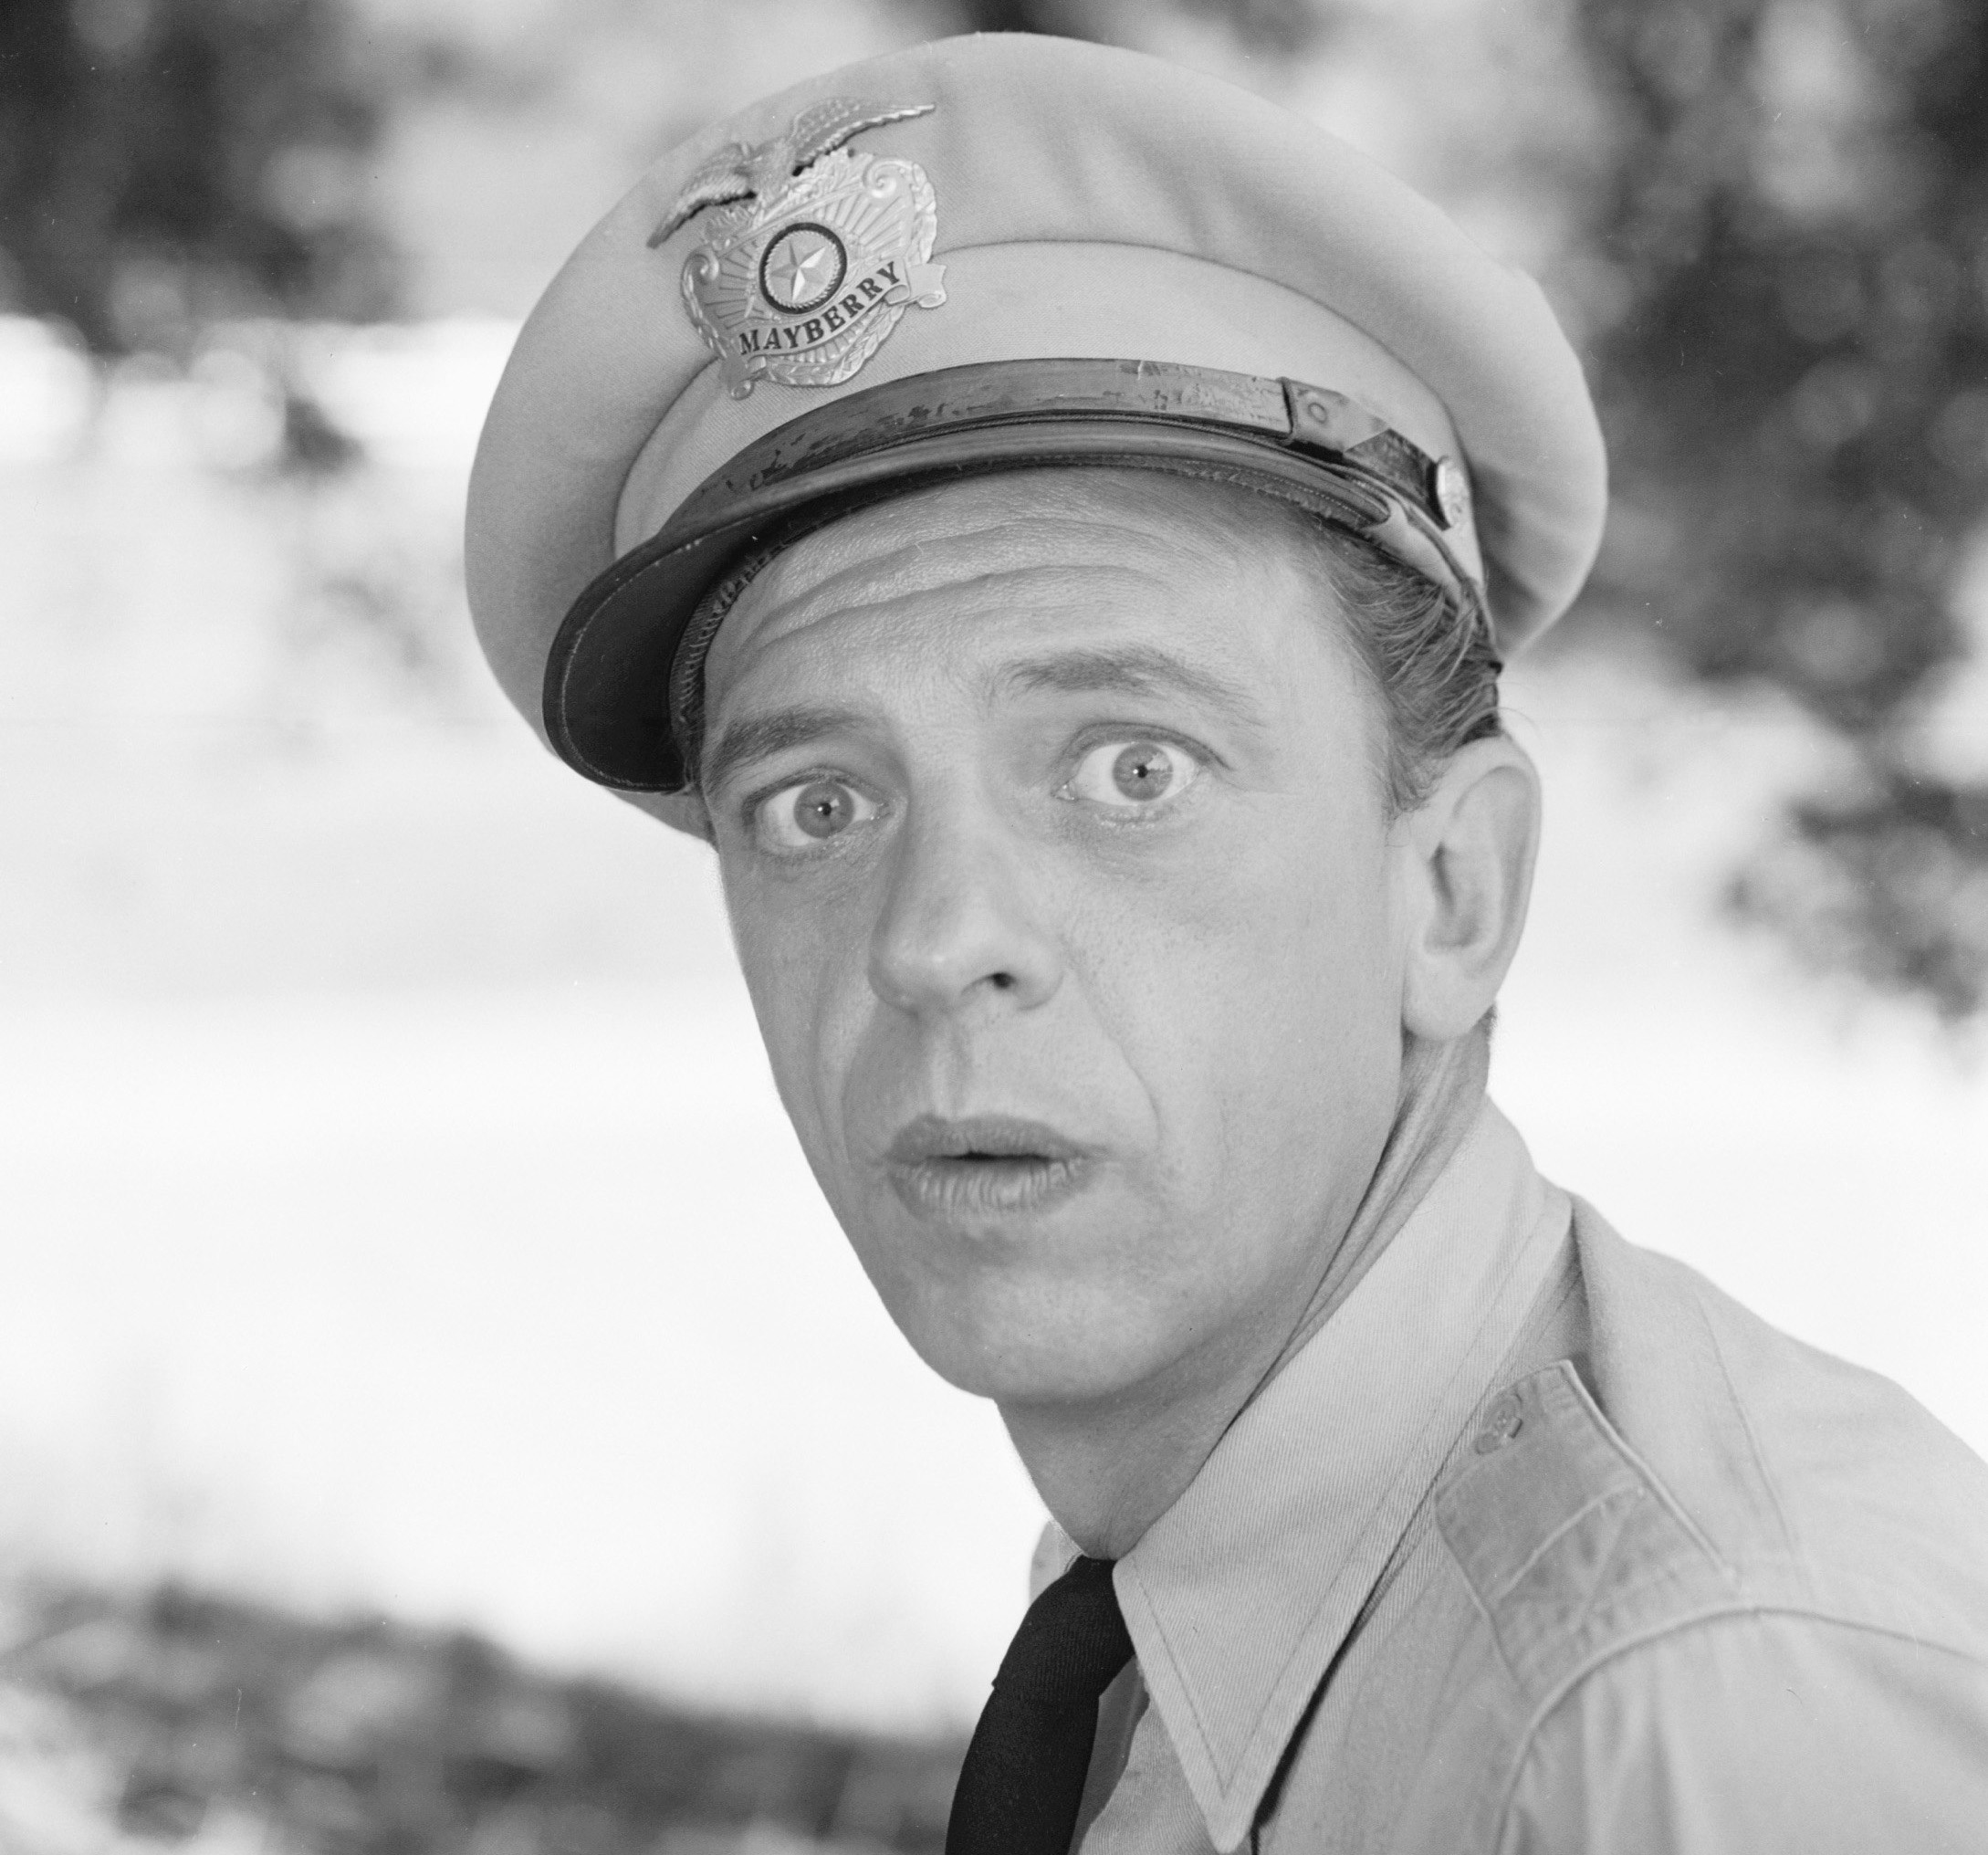 How Don Knotts Went From The Andy Griffith Show To Making Movies